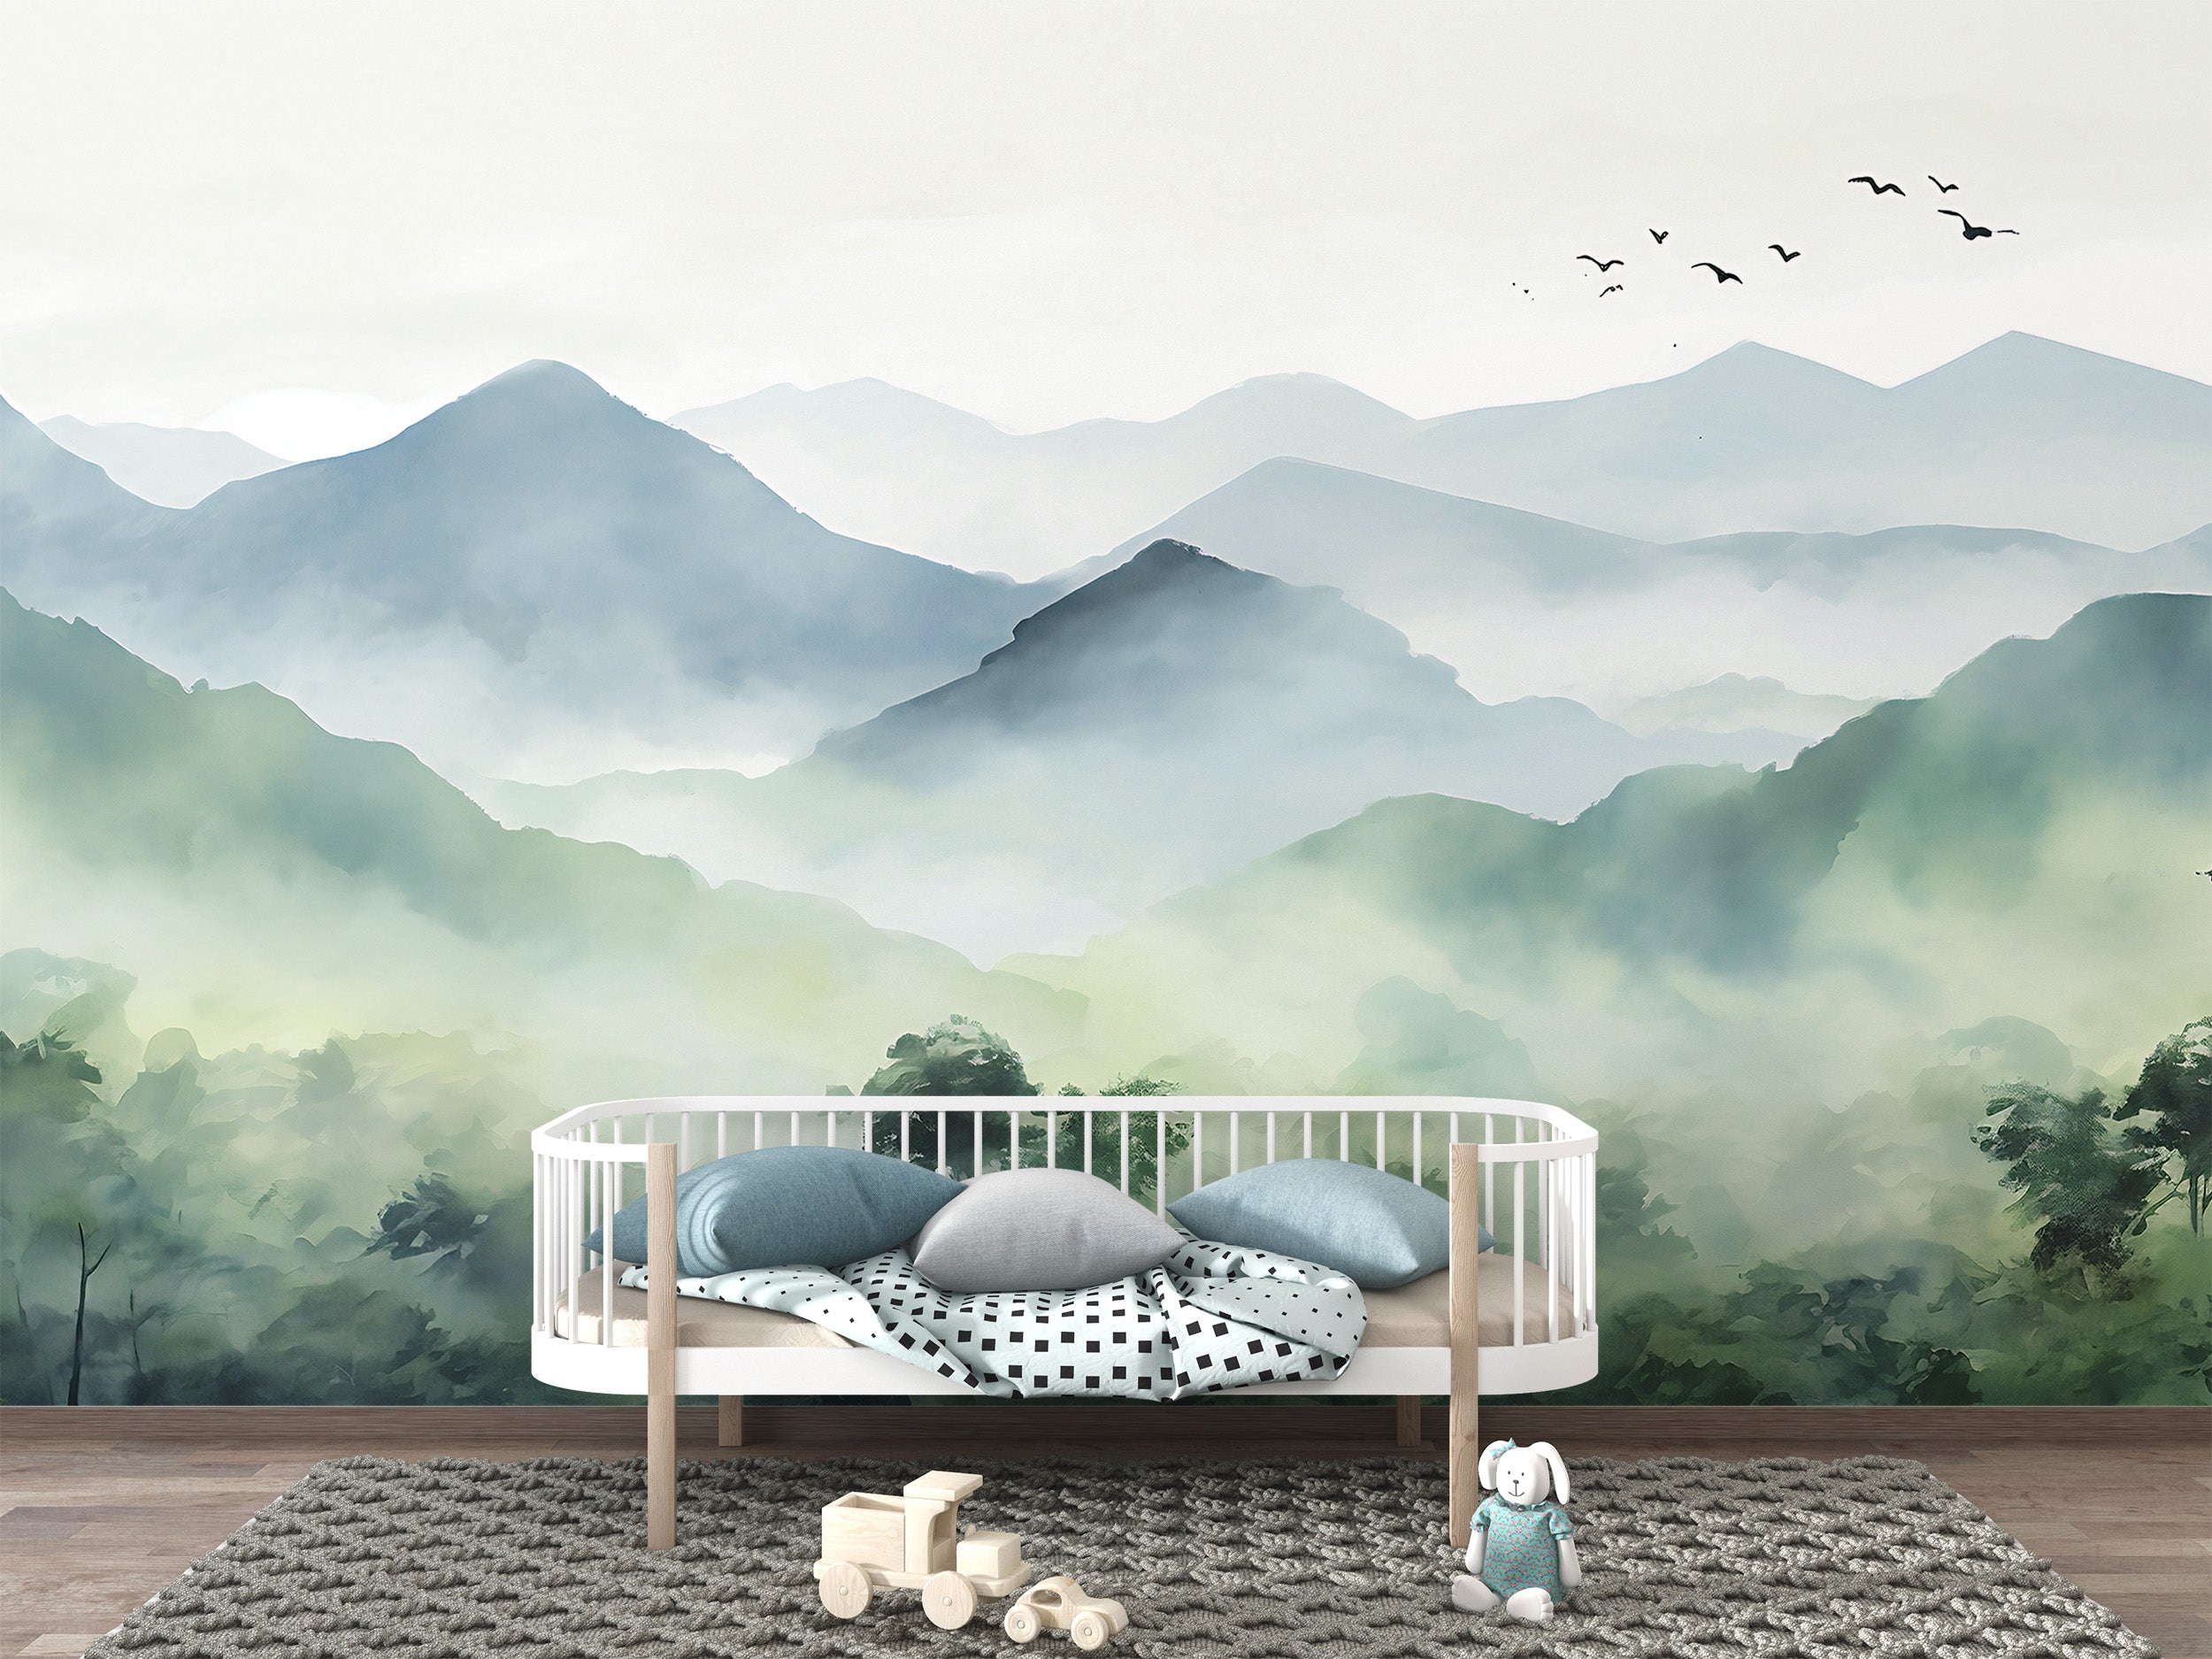 Redefine Your Child's Space with Scenic Mountains